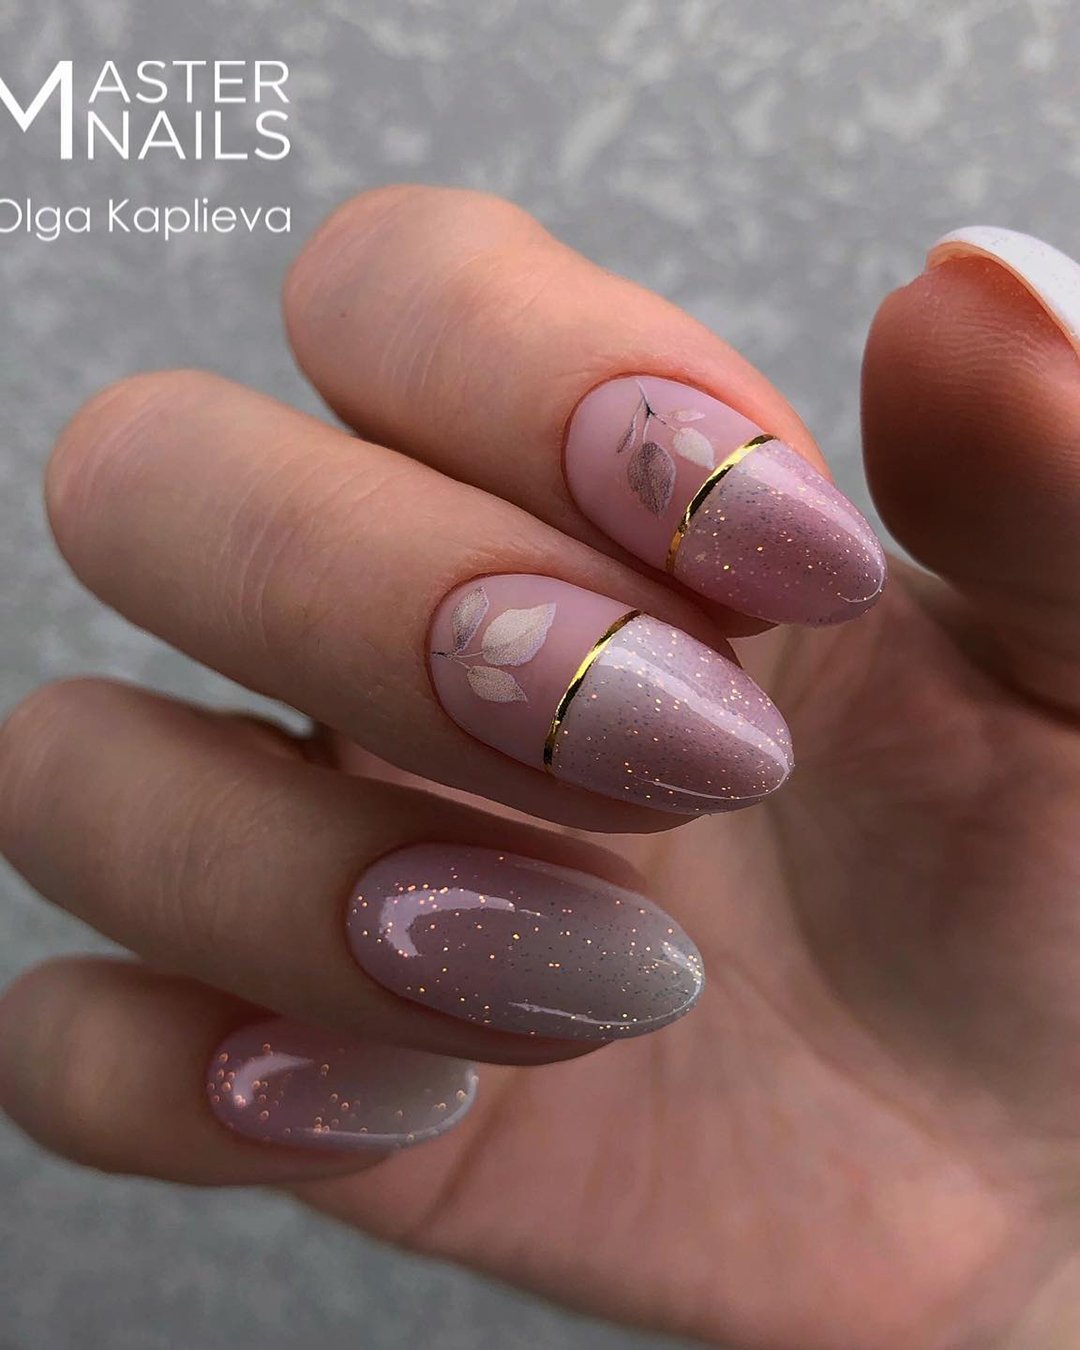 wedding nails design elegant nude pink with with gold stripes 1masternails